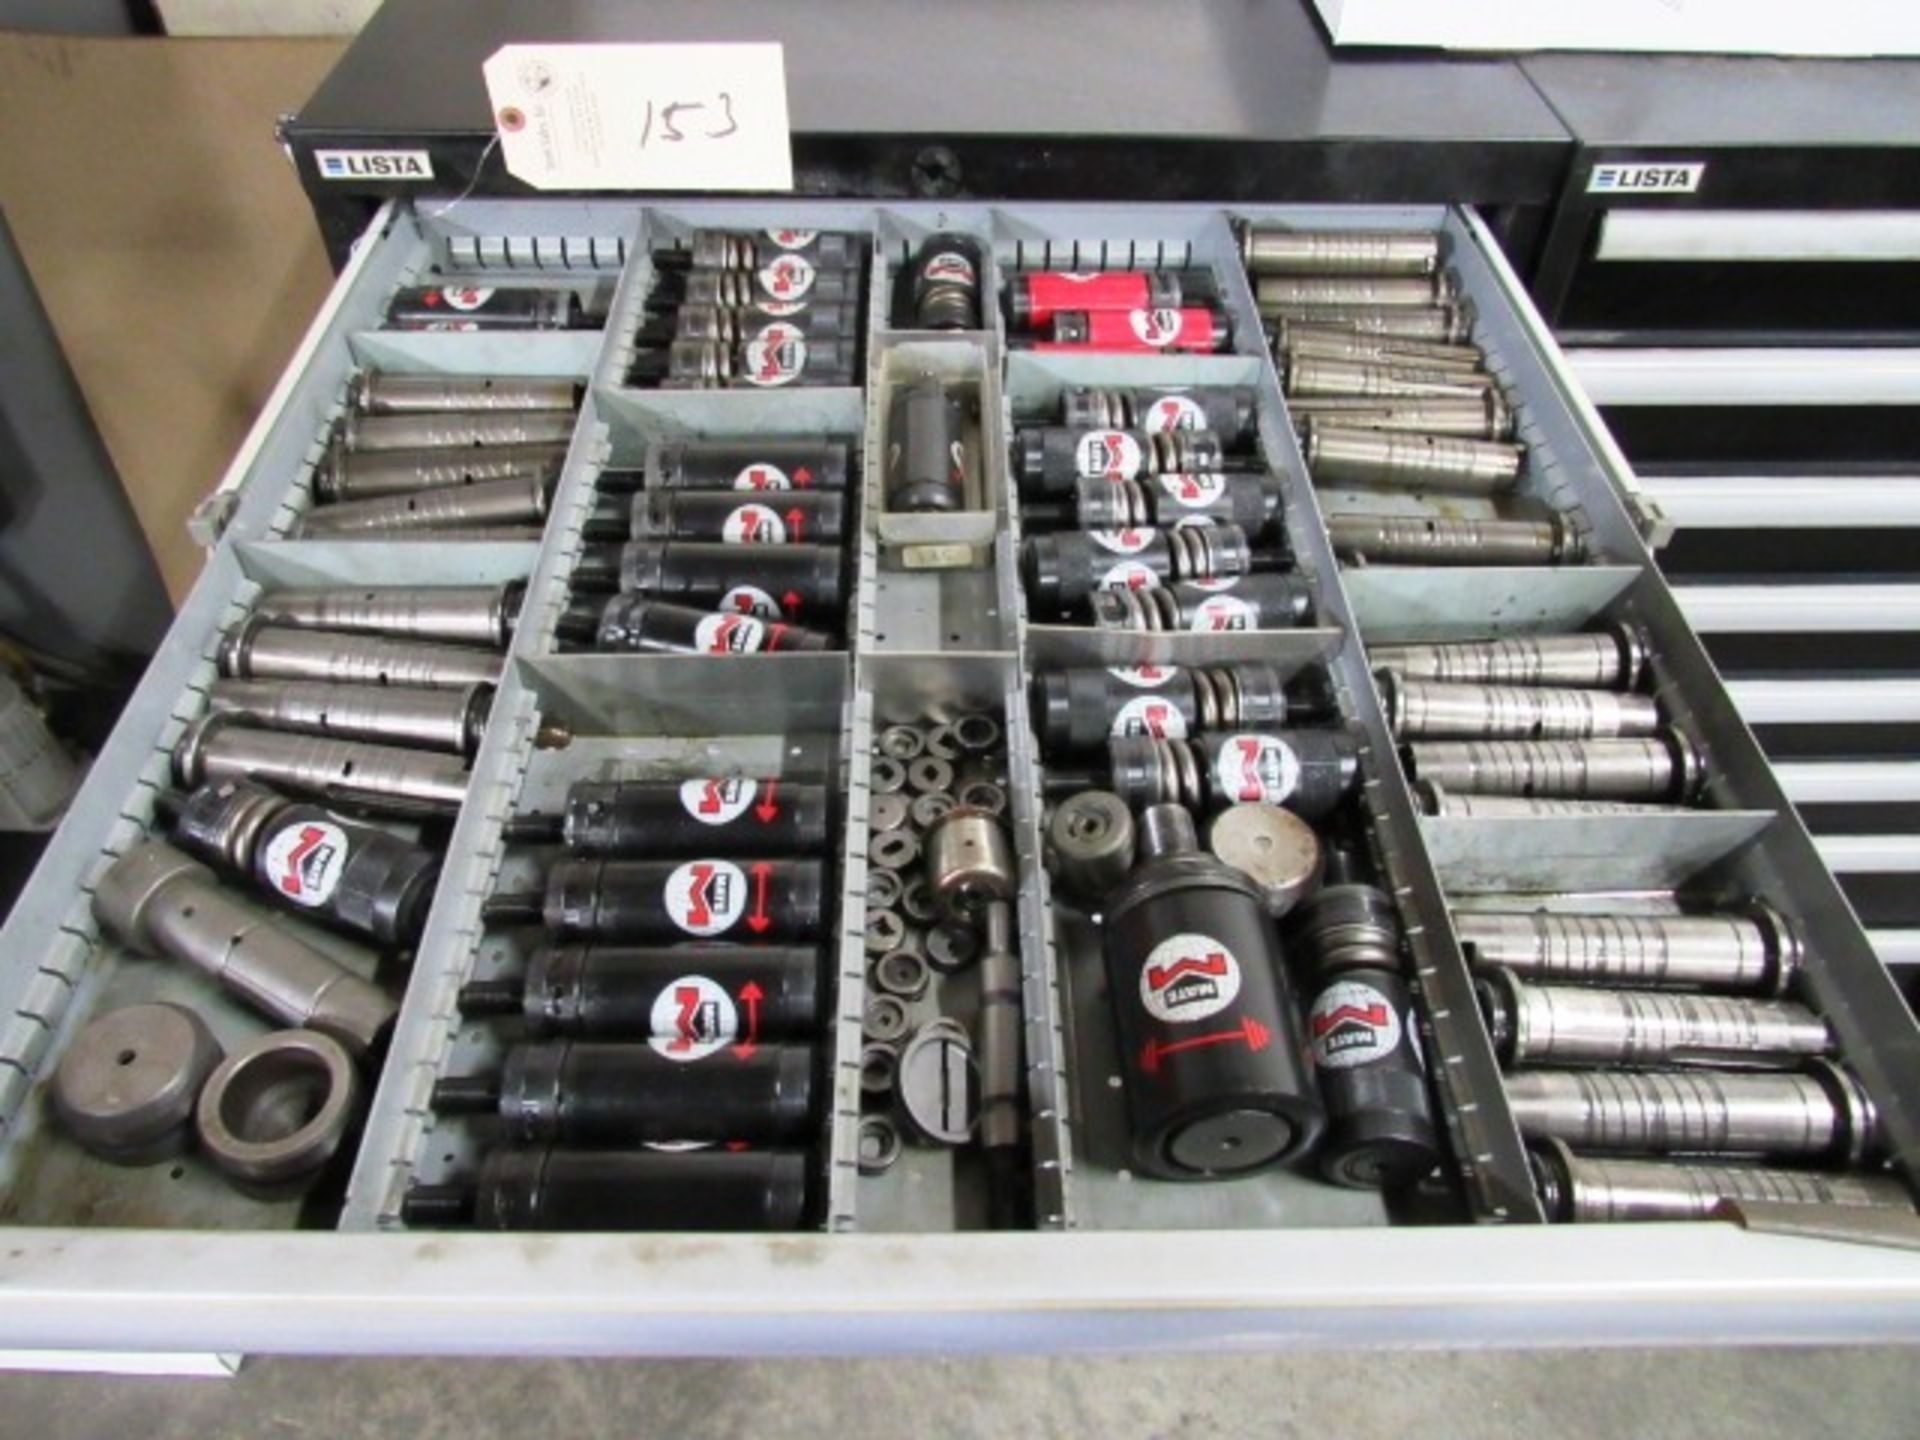 Lista 11 Drawer Tool Cabinet with Wilson & Mate Turret Punch Tooling - Image 12 of 12